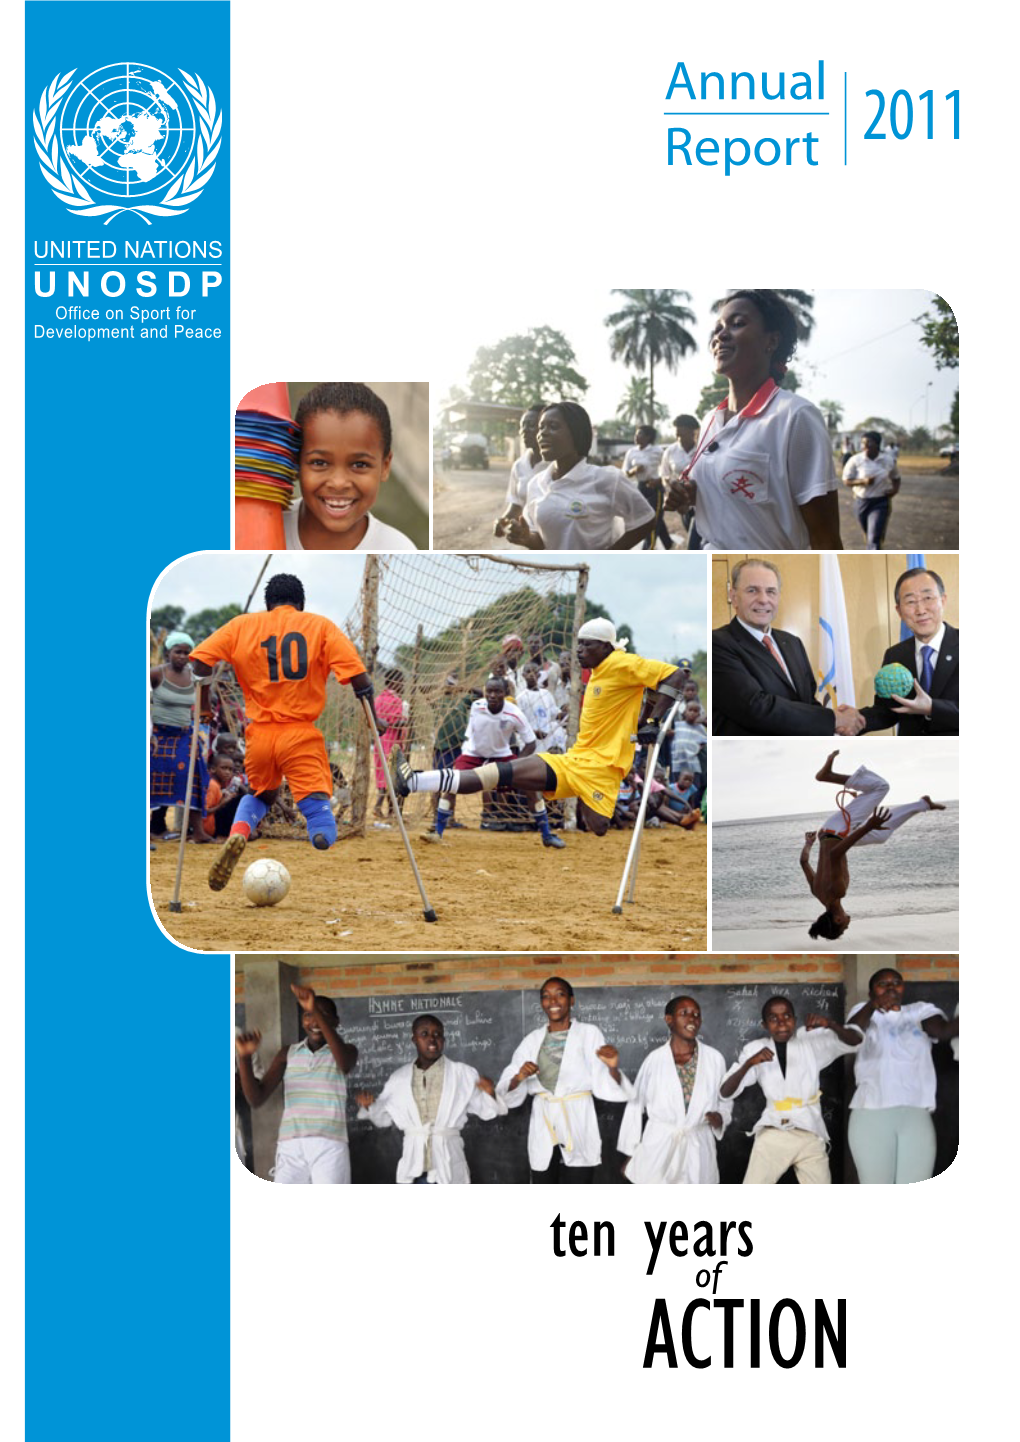 UNOSDP ANNUAL REPORT 2011 Covering 1 January Through 31 December 2011